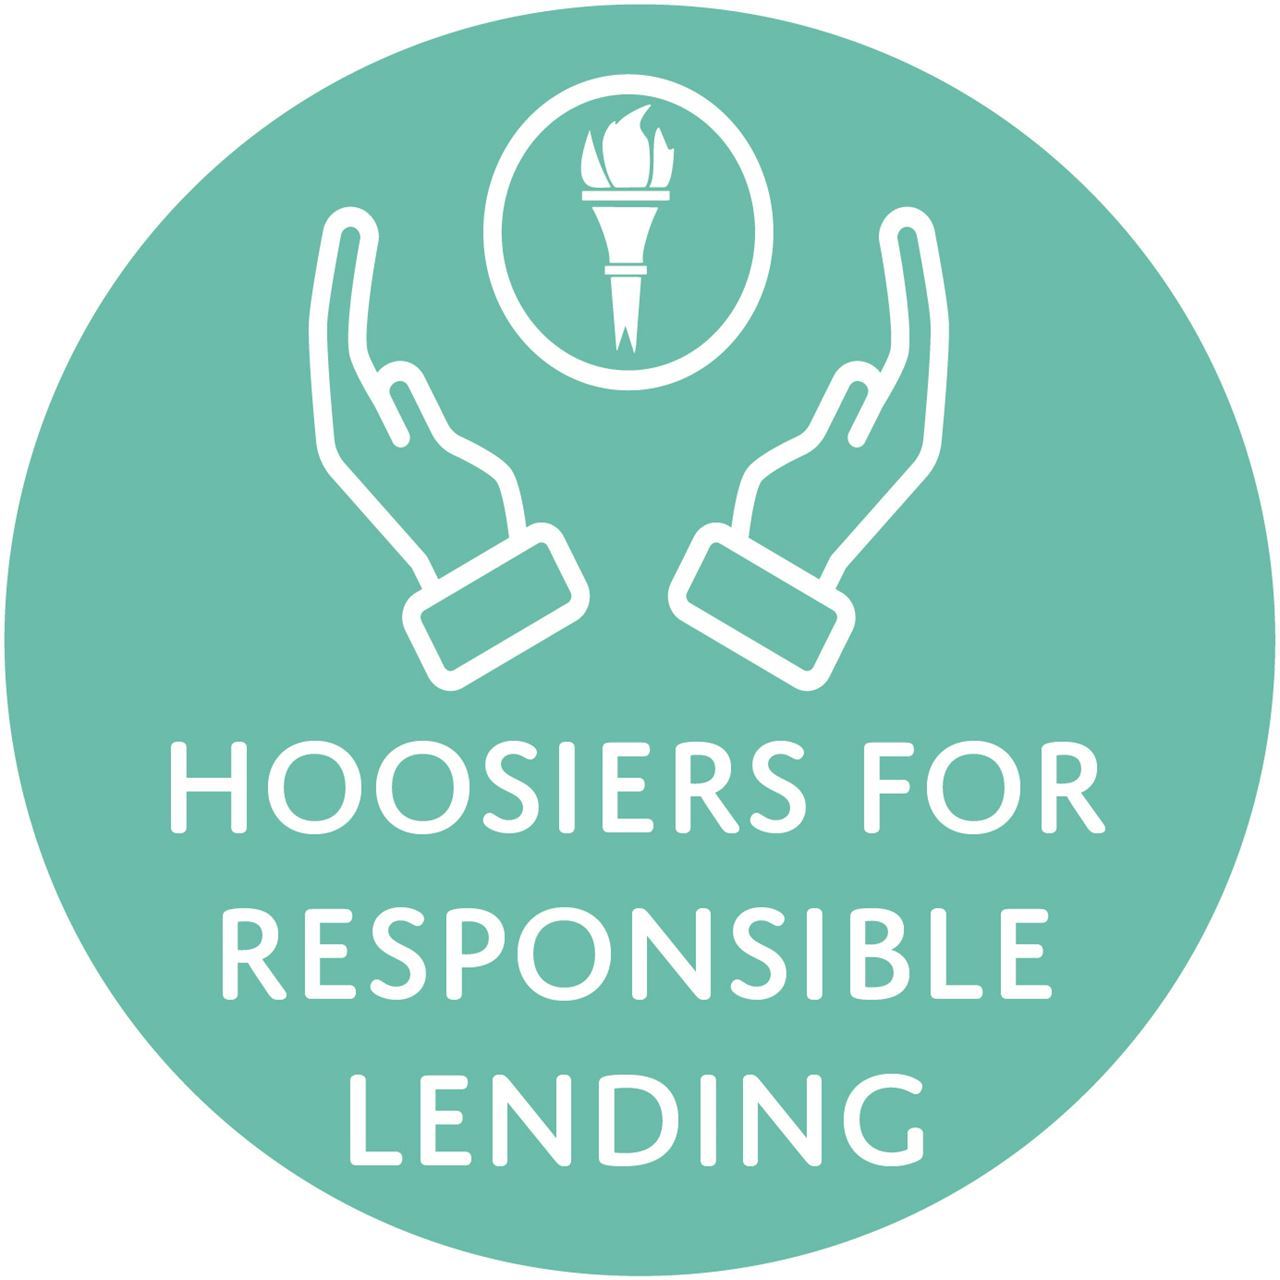 Hoosiers for Responsible Lending Logo a set of hands holding a coin